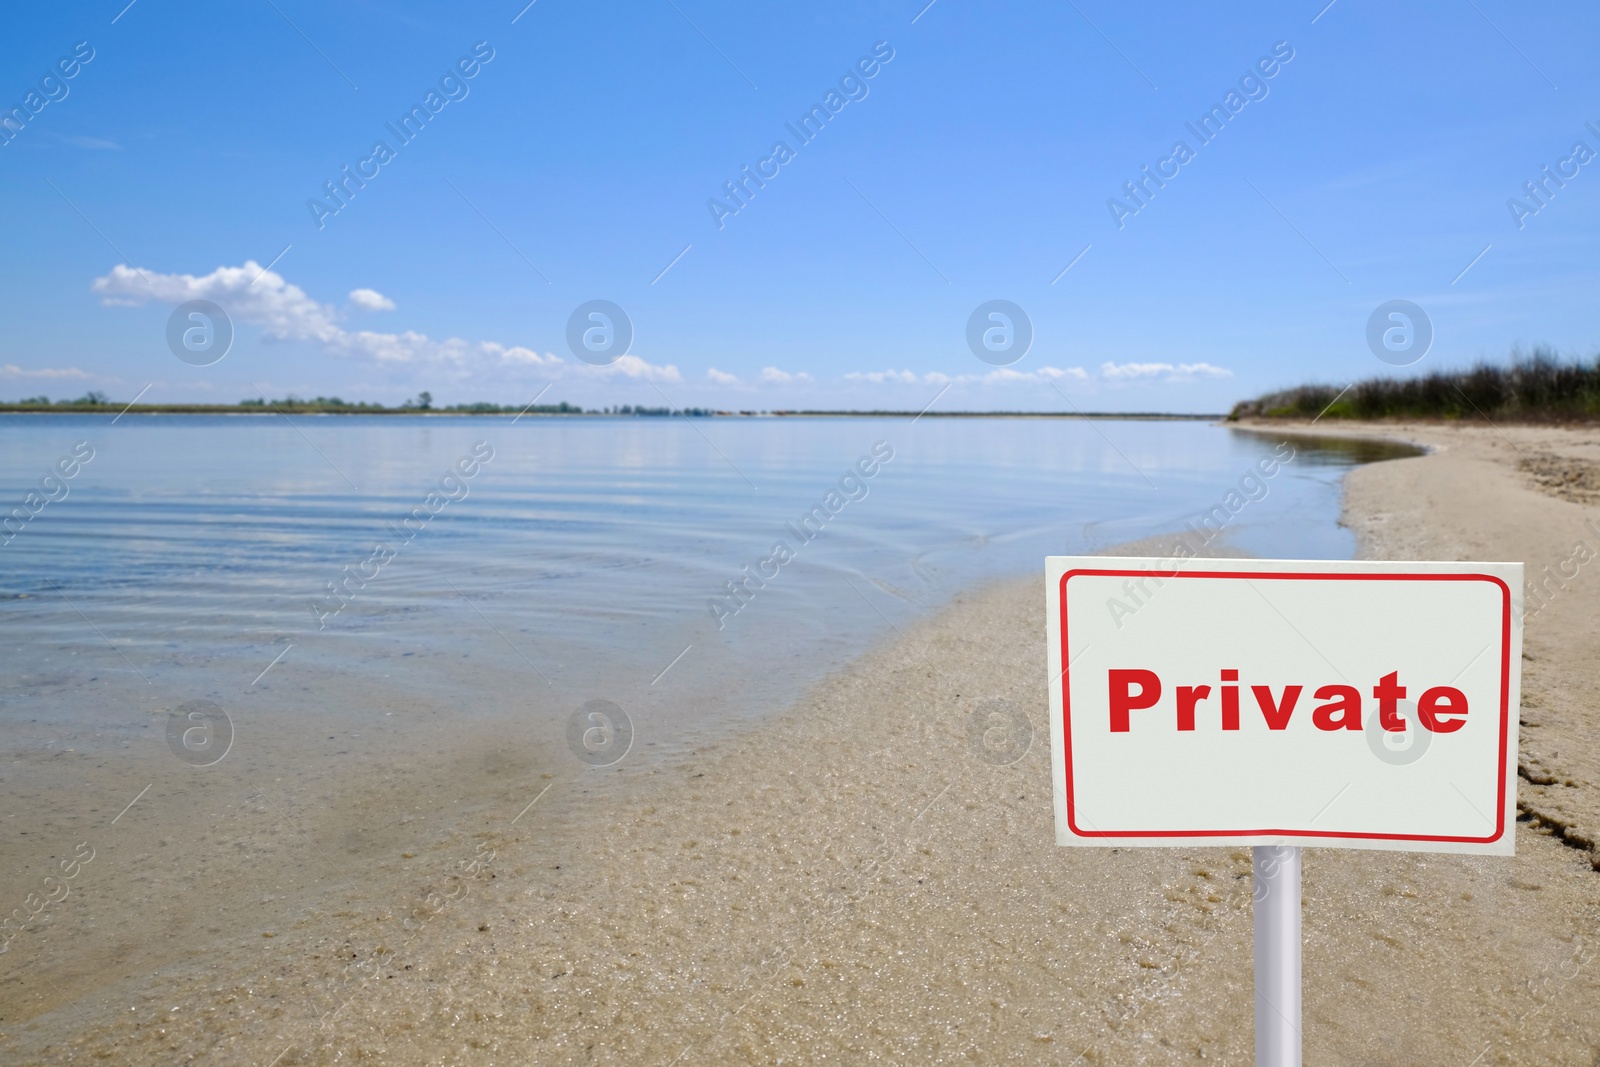 Image of Sign with word Private on sandy beach near river